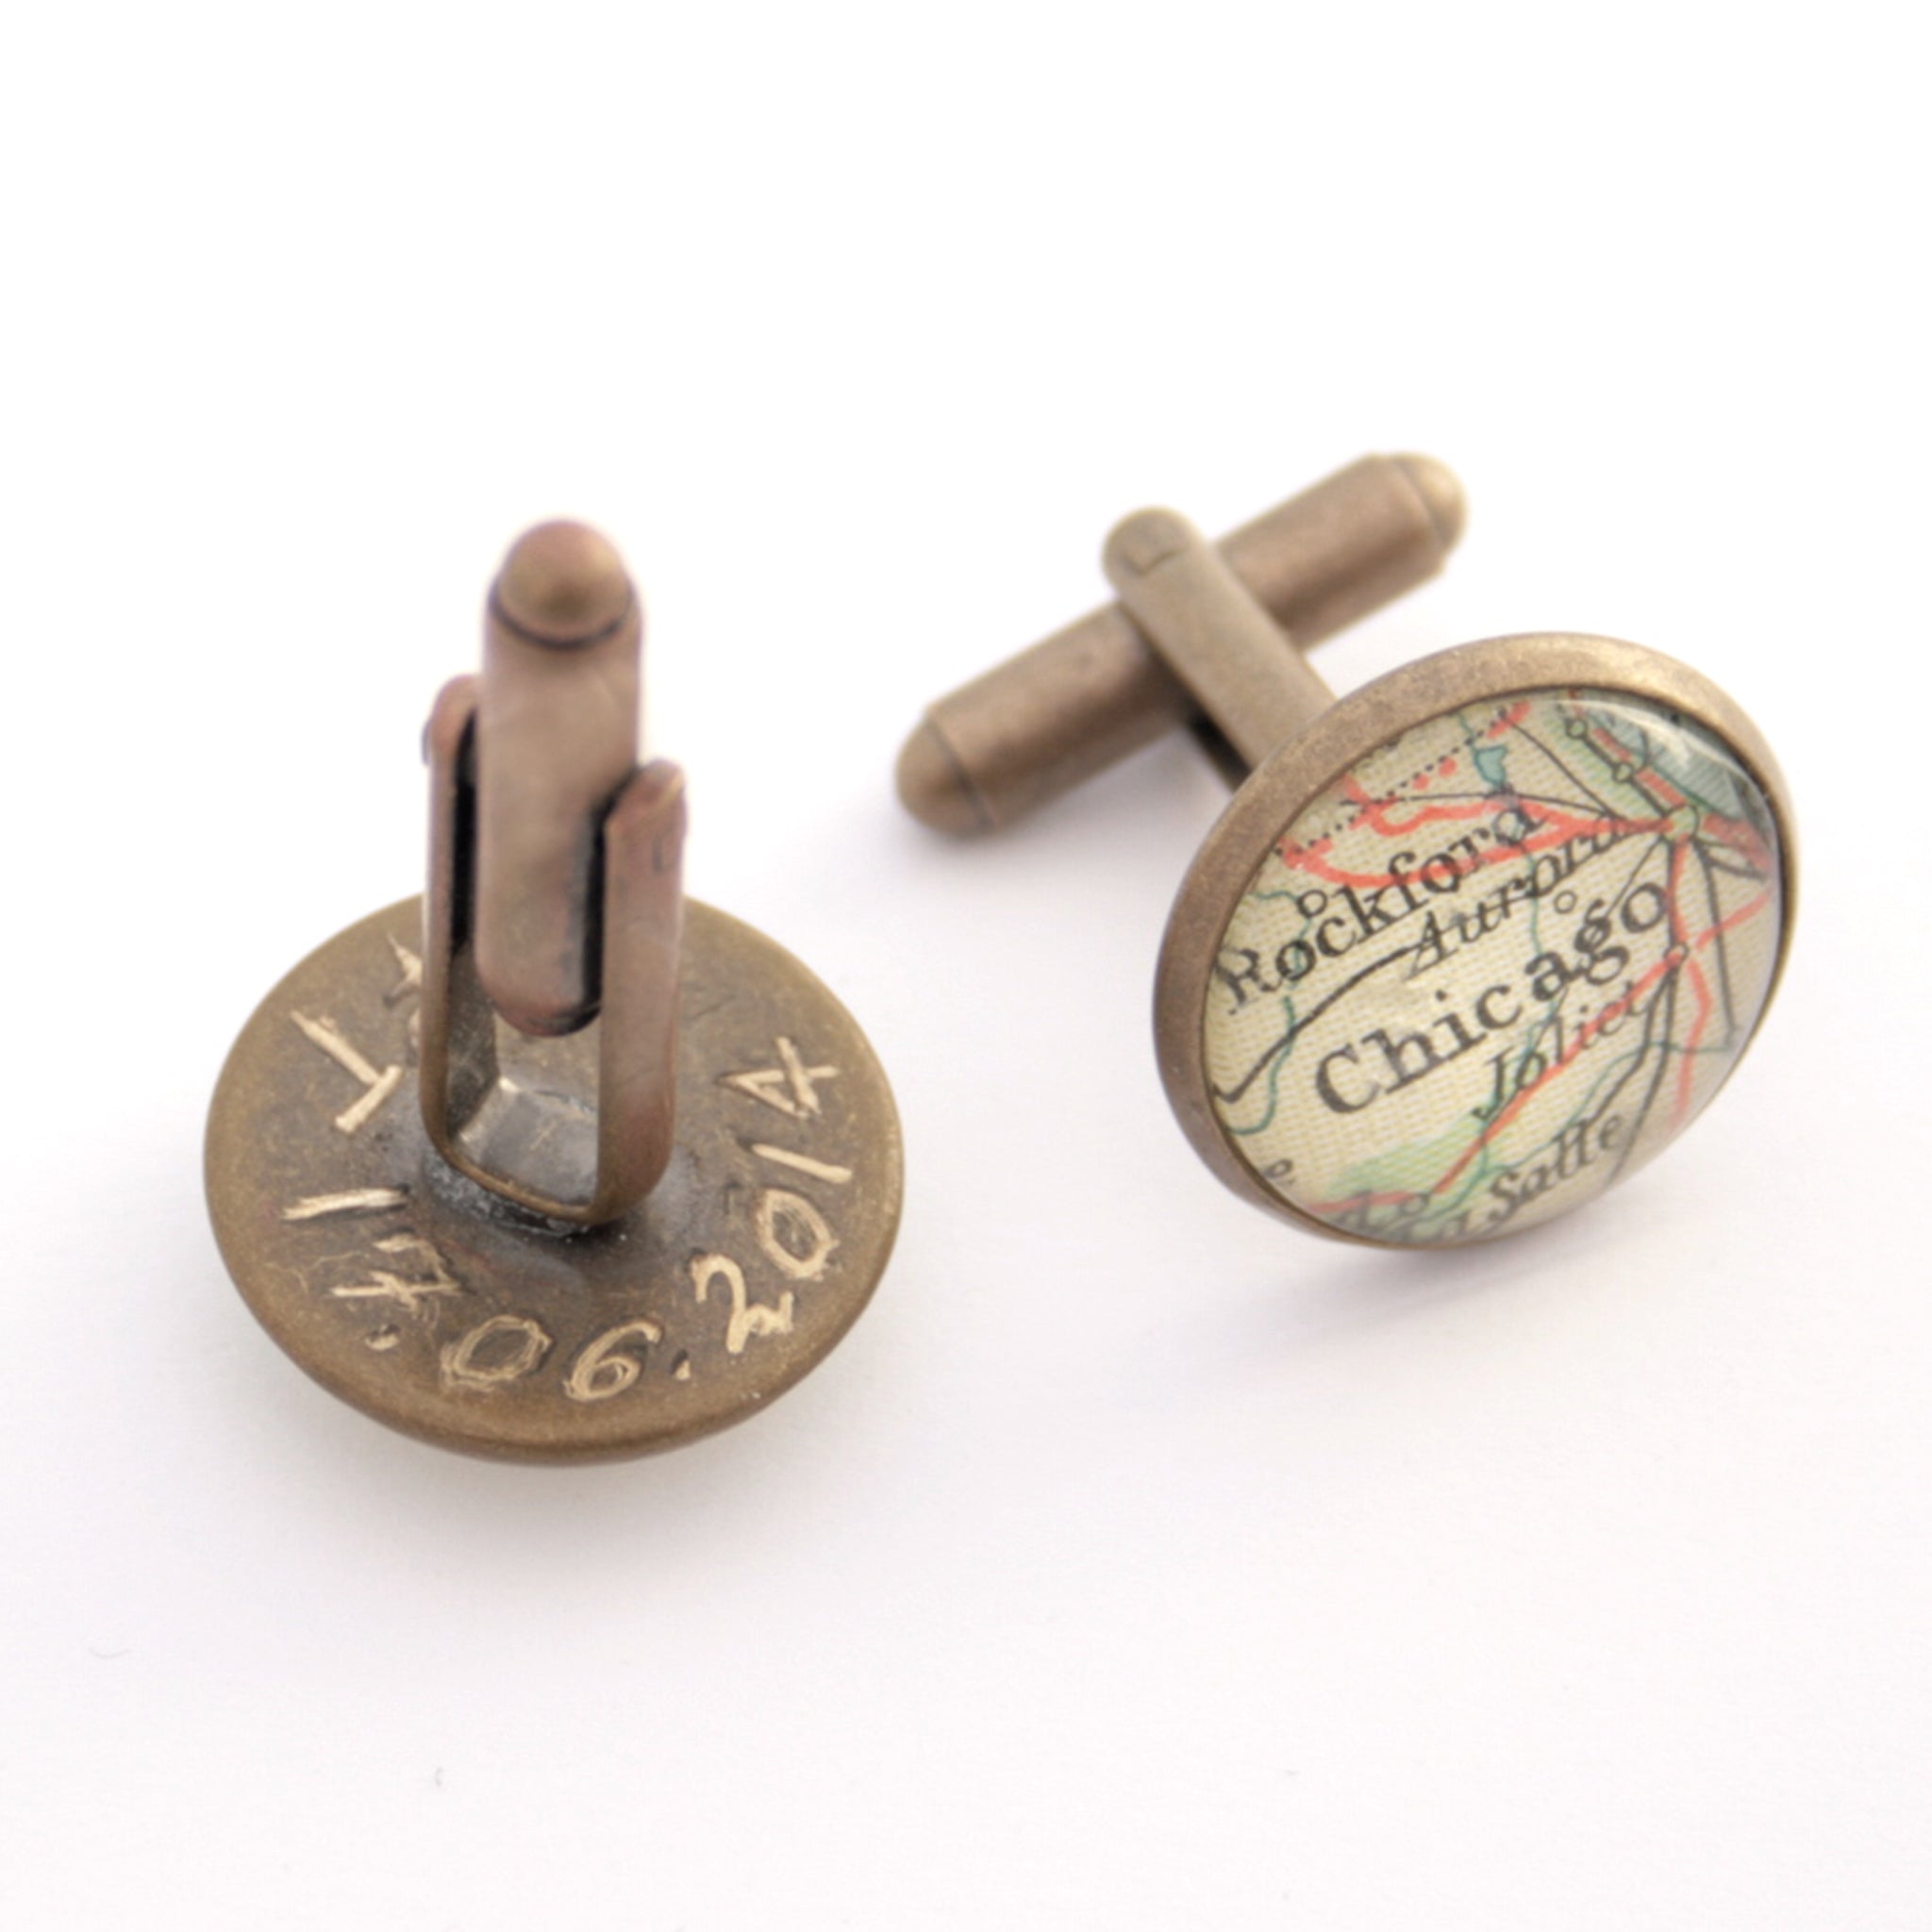 Personalised map cufflinks in antique bronze color with an engraving featuring maps of Chicago